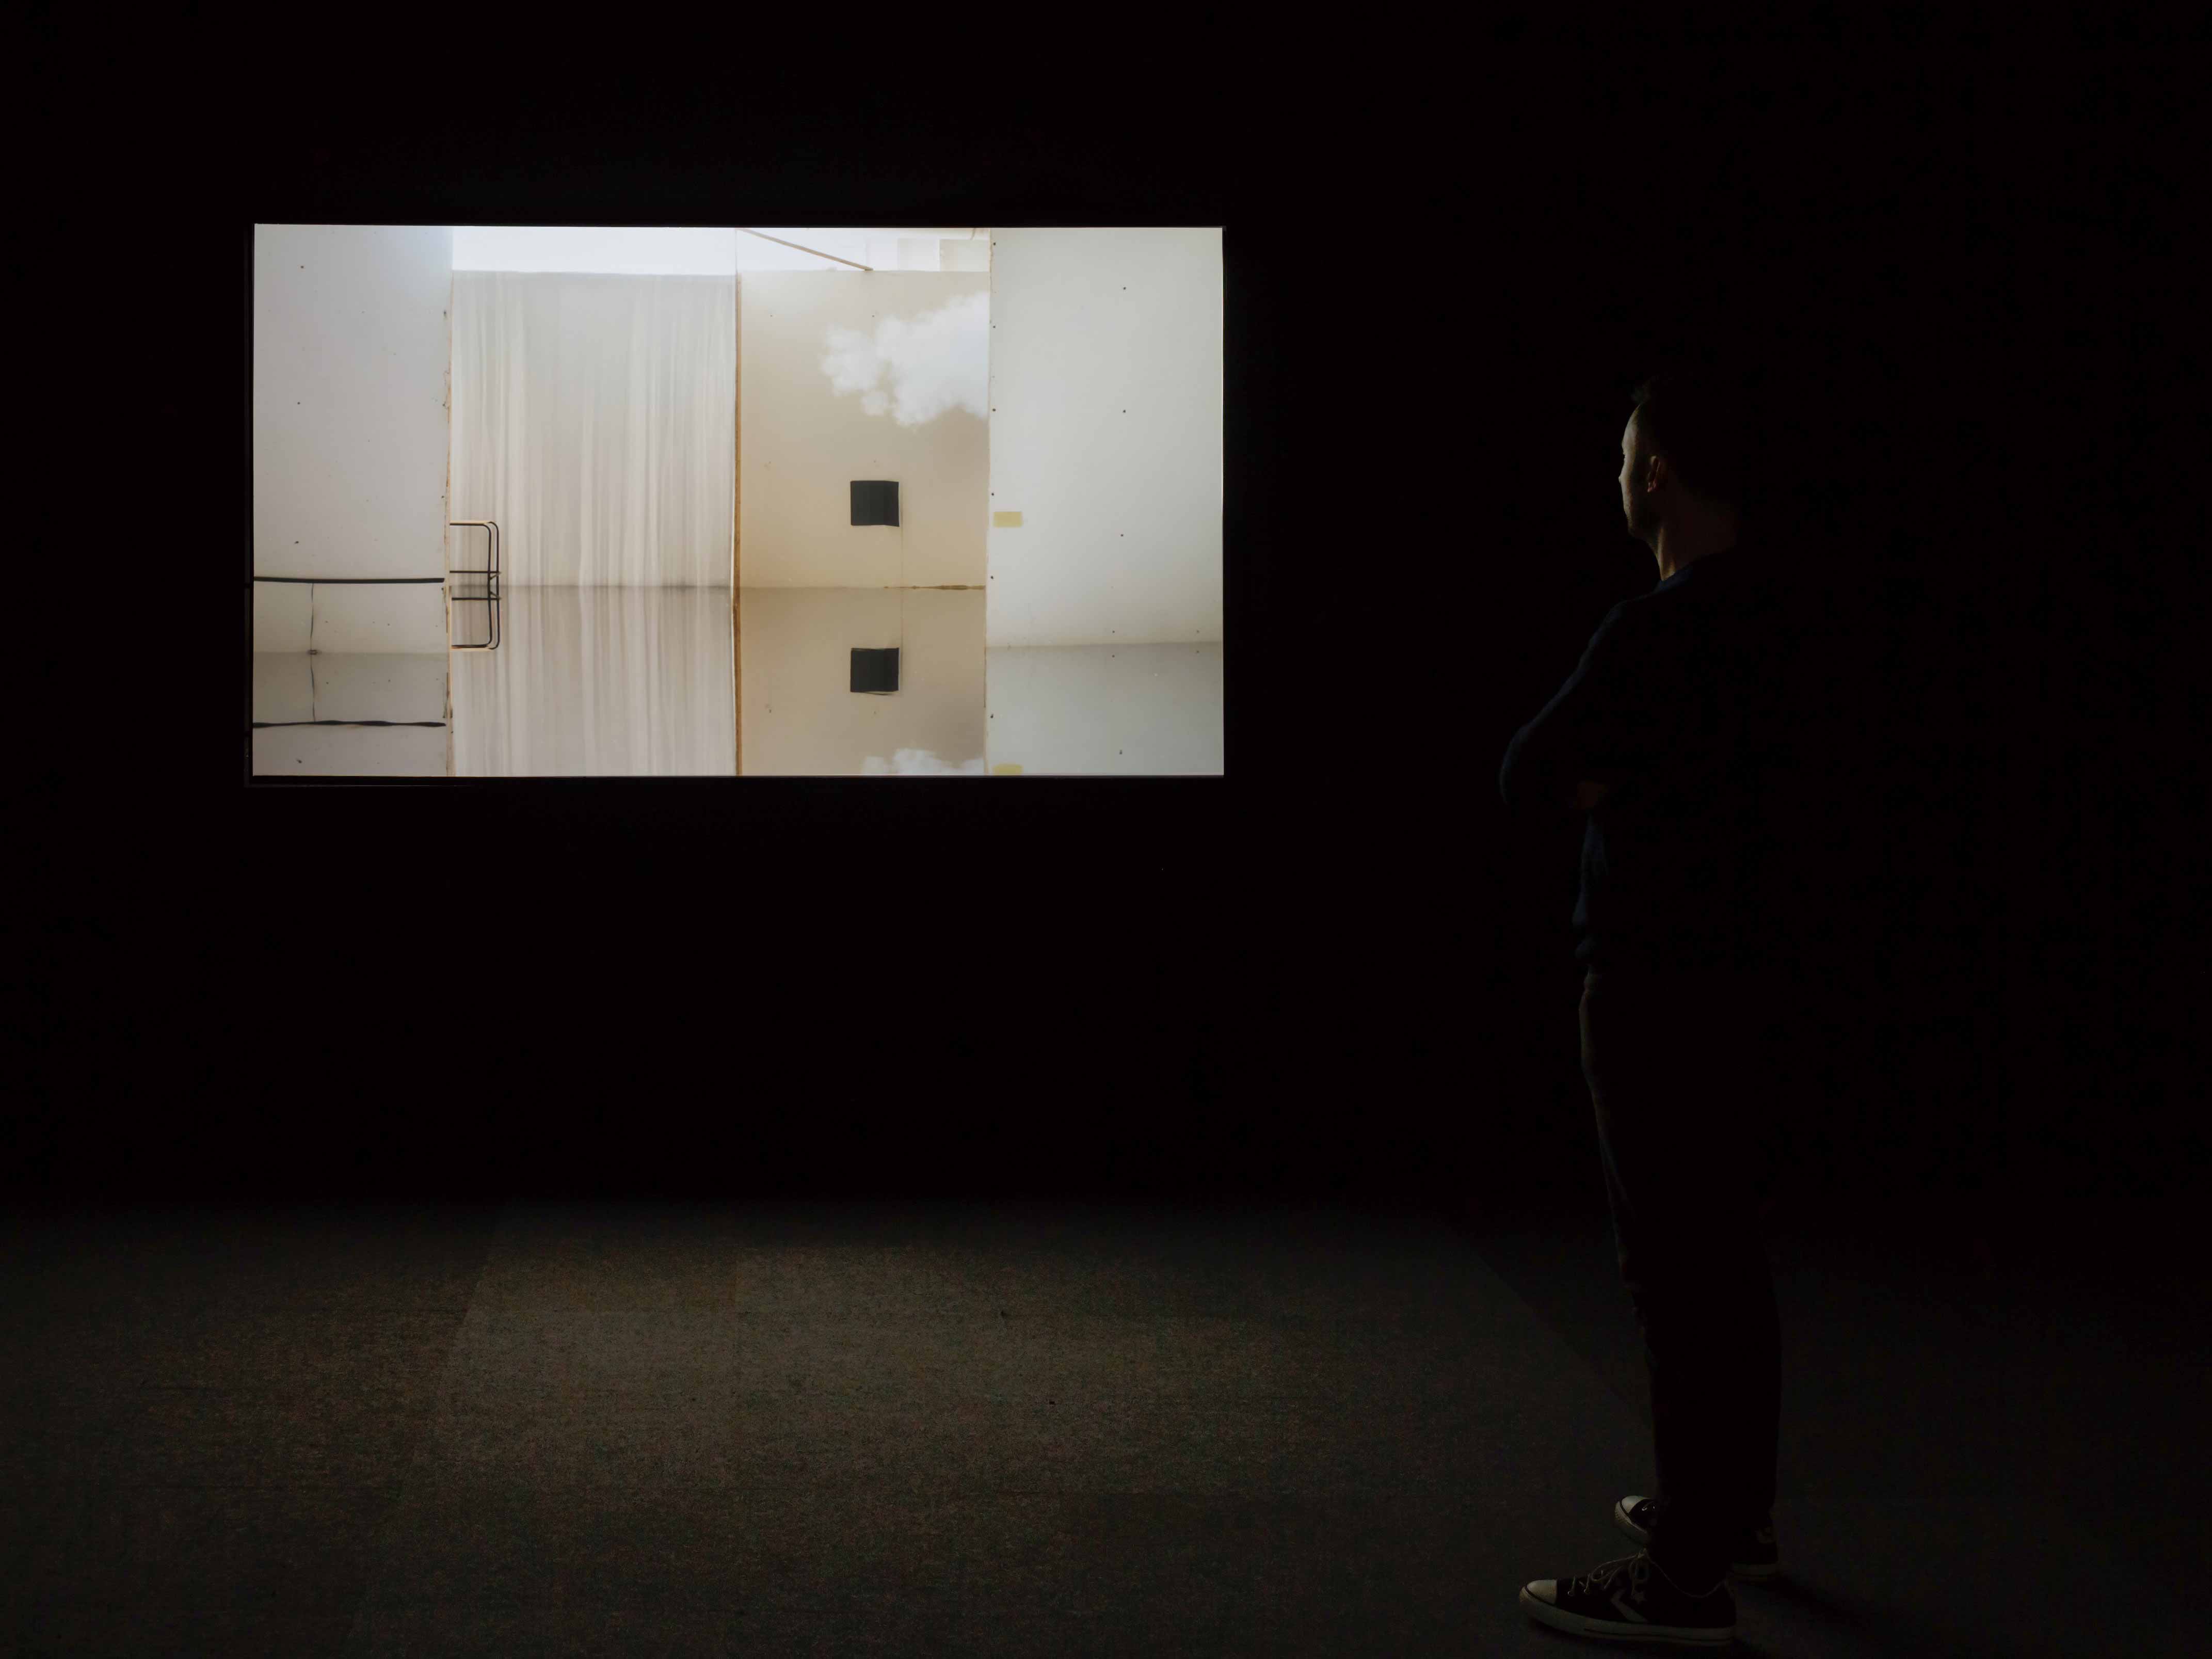 Ailbhe Ní Bhriain 'Reports to an Academy' four–screen installation, video & cgi composite, colour, sound, looped, 2015; installation view at The Royal Hibernian Academy, Dublin, Ireland, curated by Patrick T. Murphy, photograph by Mike Hannon